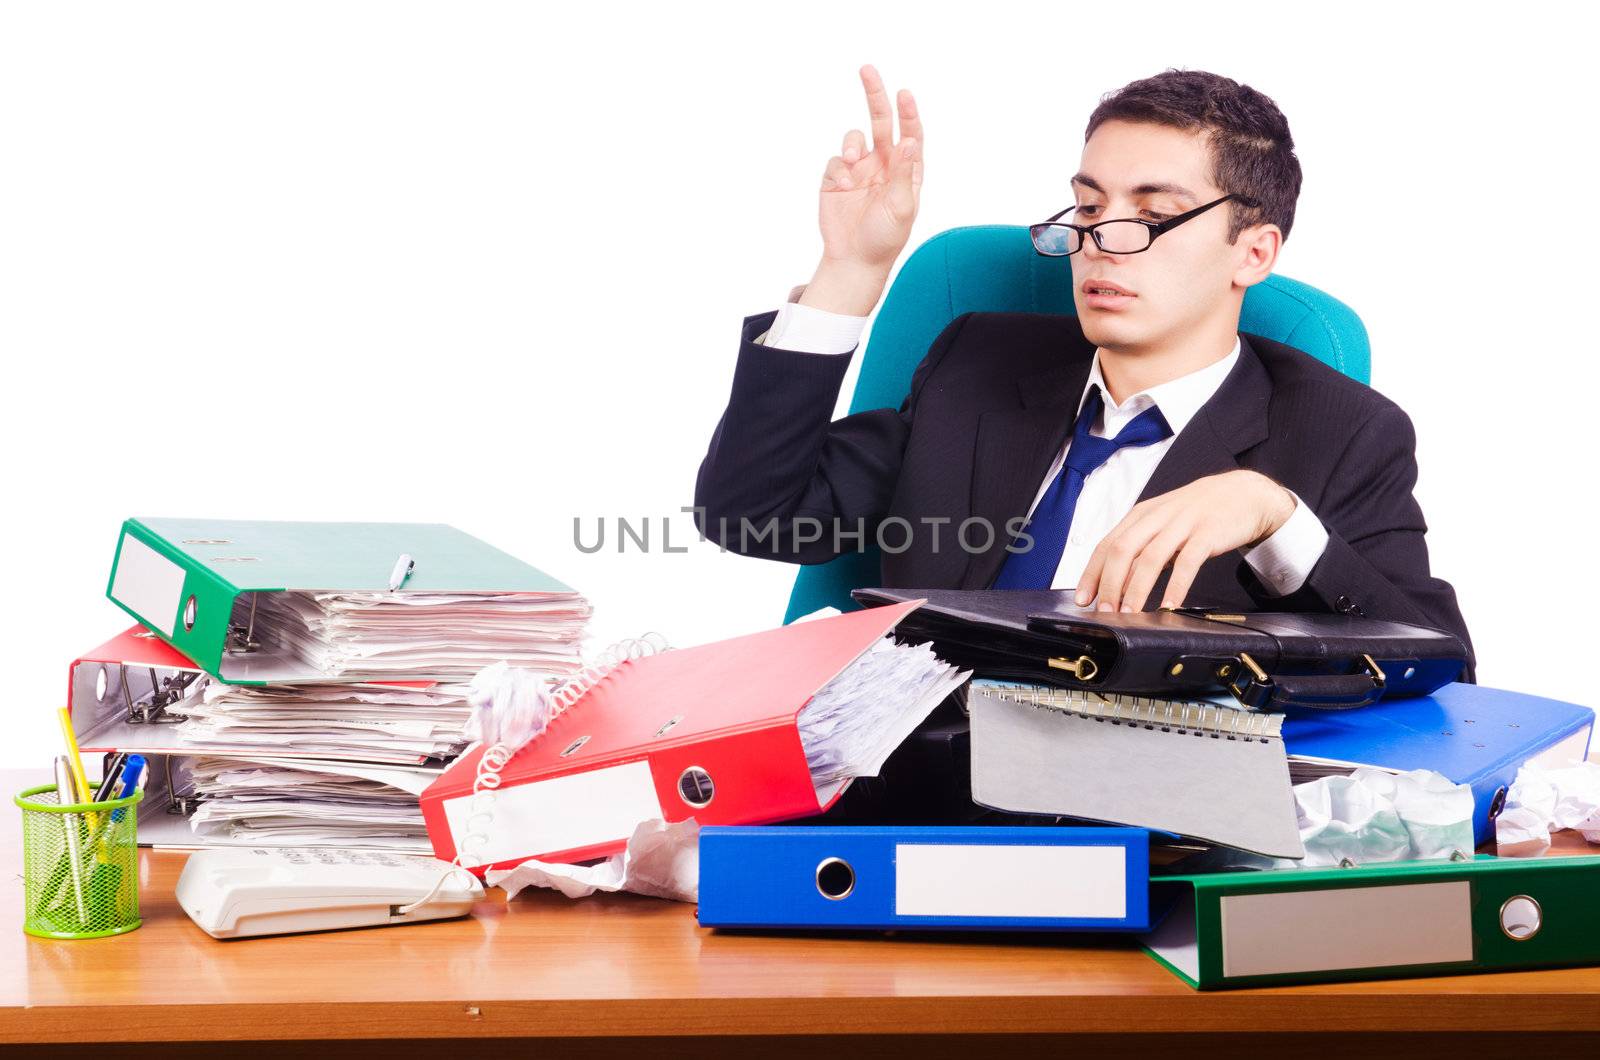 Busy stressed man in the office